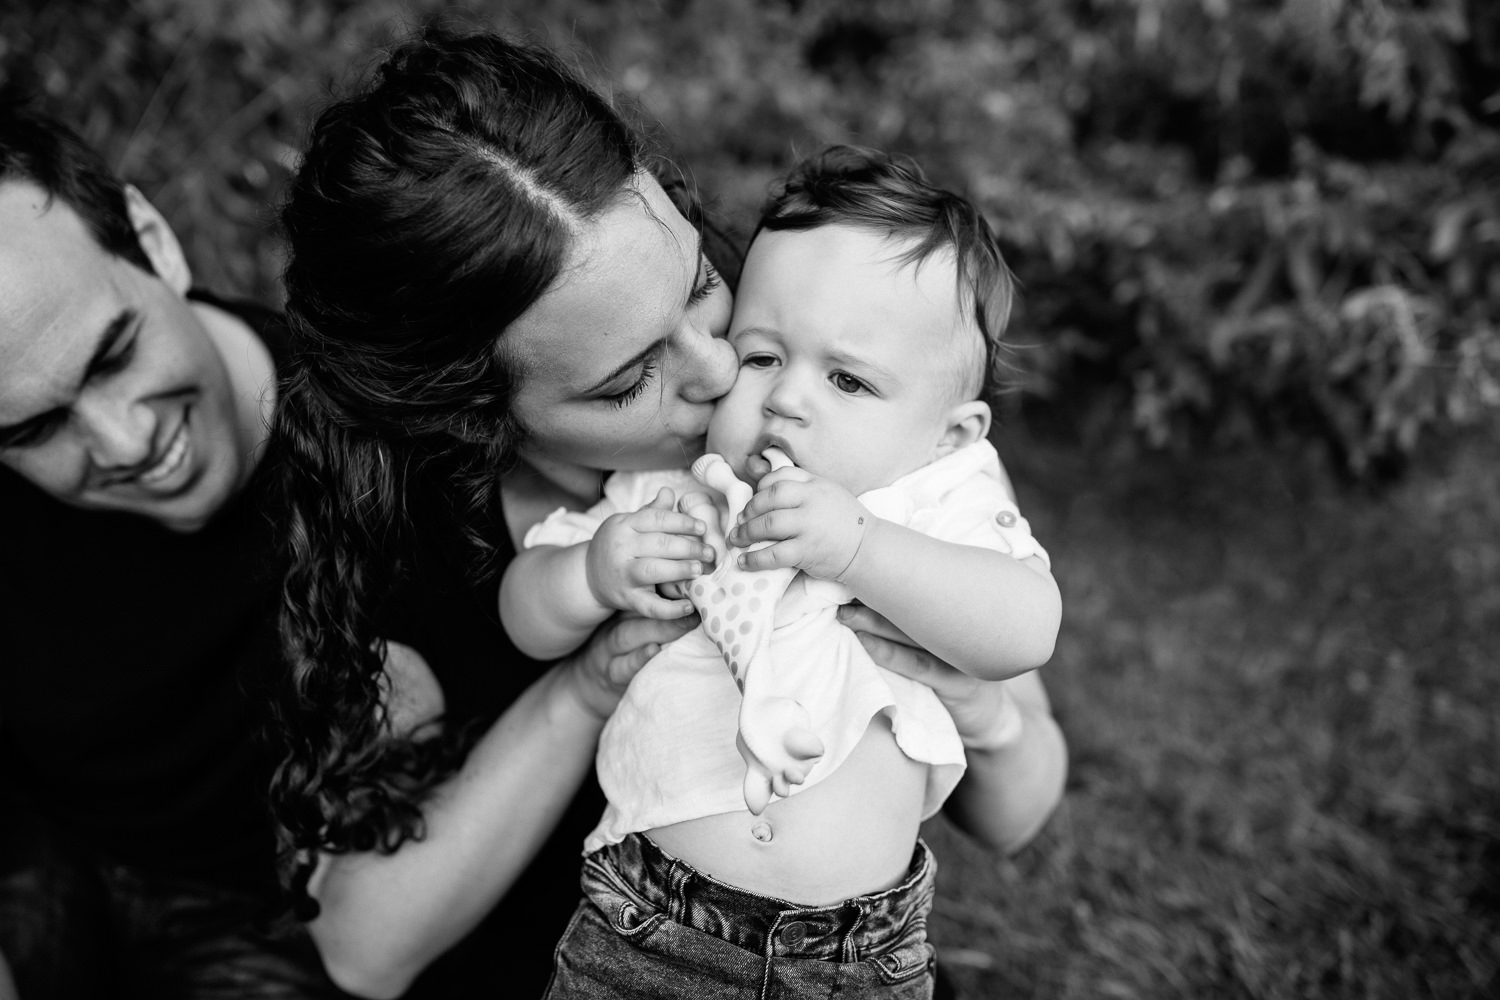 mom holding up 9 month old baby boy with dark hair chewing on Sophie the giraffe, mother kissing son on cheek, dad sitting behind smiling - Stouffville Lifestyle Photography